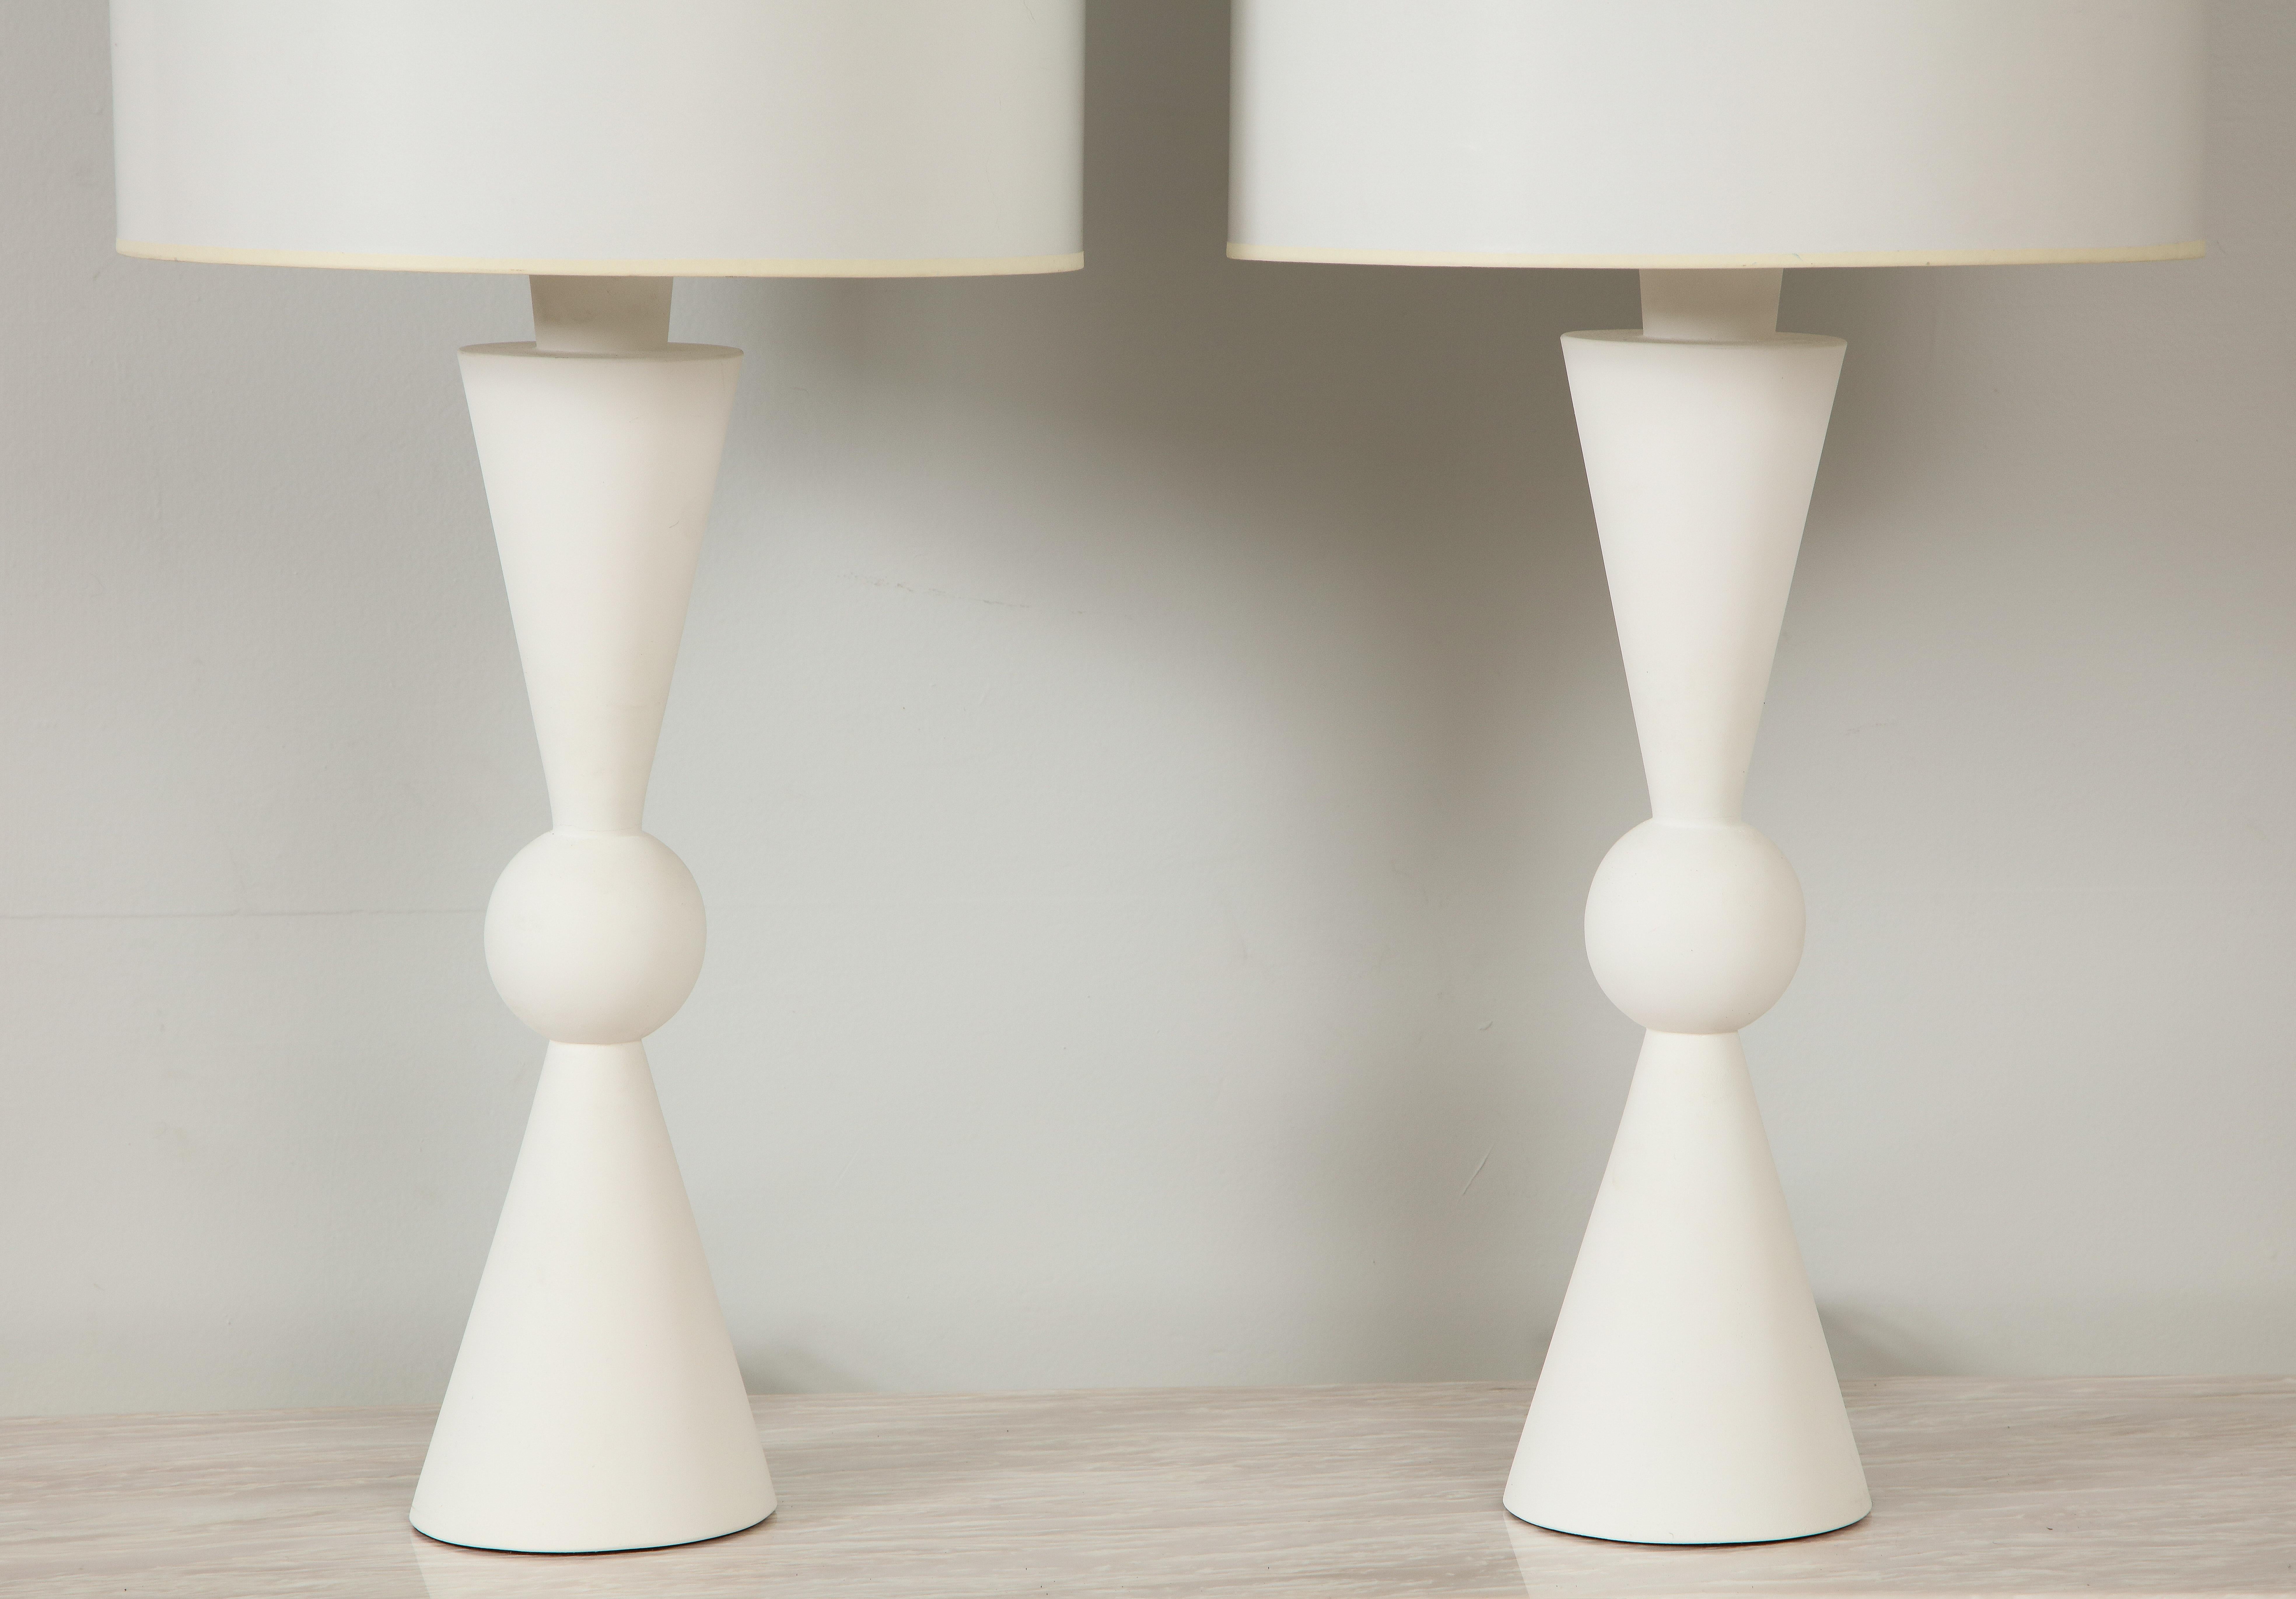 Pair of custom plaster Arlo table lamps. Please note these lamps are handcrafted and are customizable can be made in a variety of sizes, may even be crafted as a floor lamp. These are also UL listed.